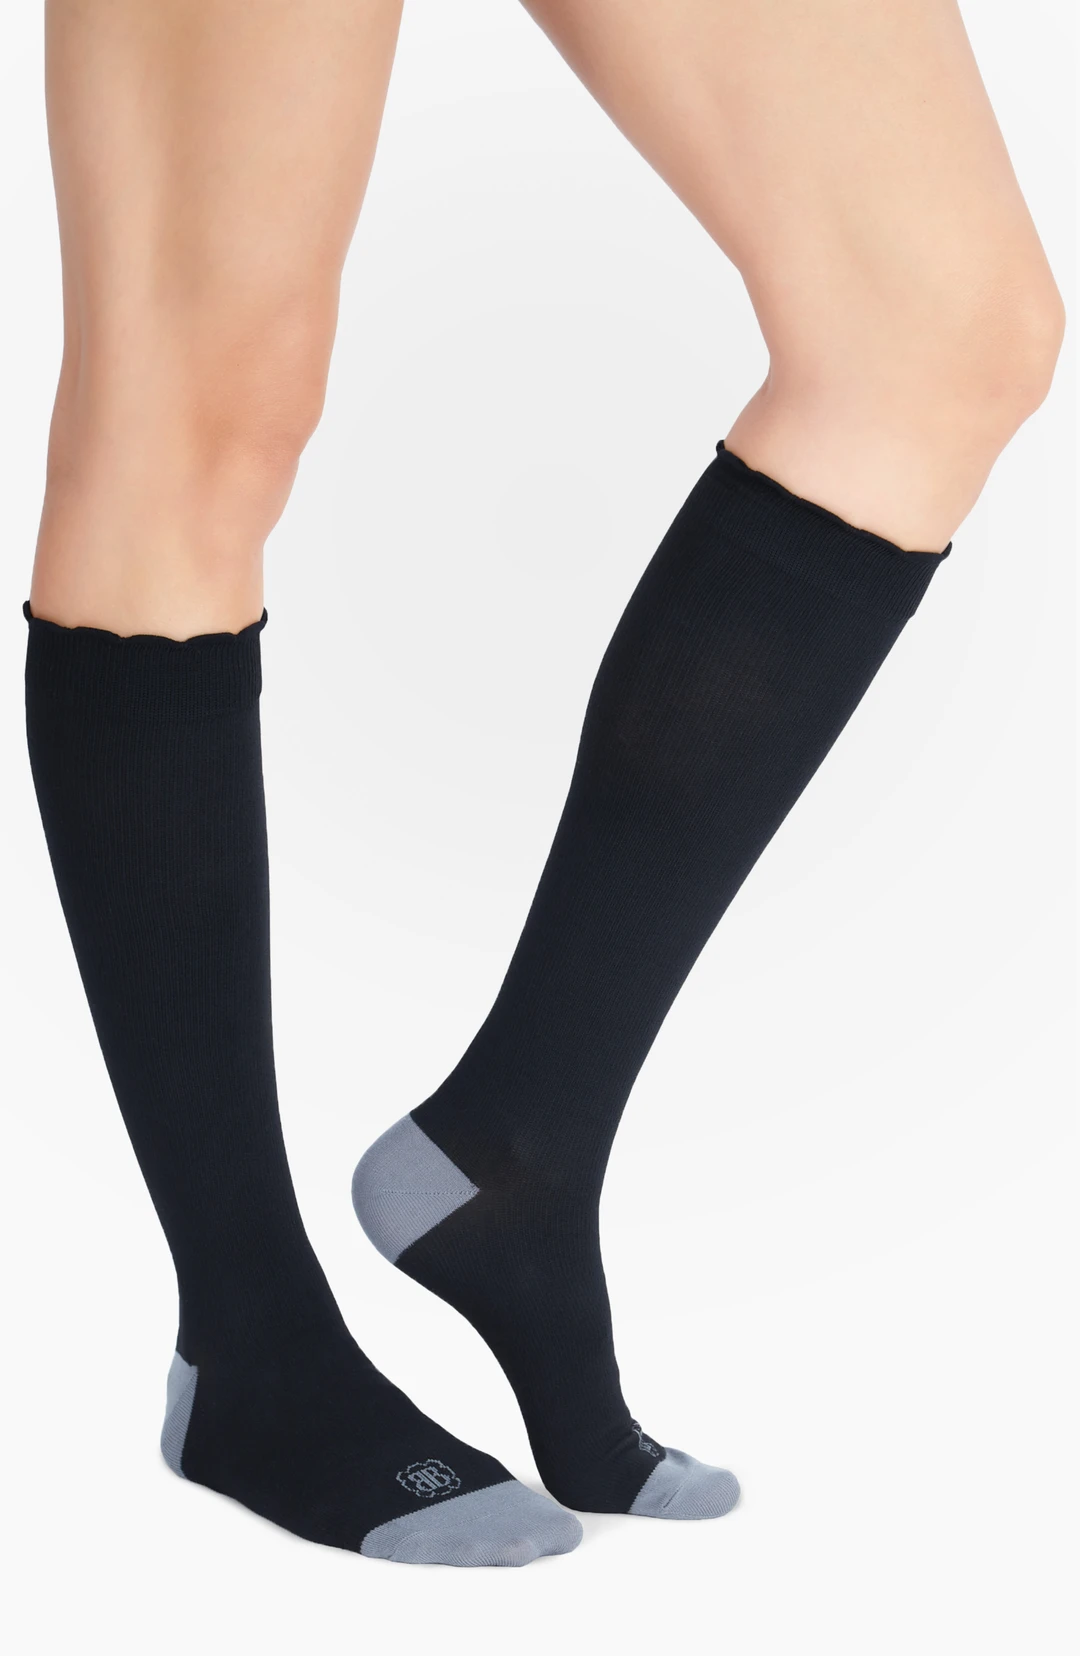 The Best Compression Socks for During and After Pregnancy To Prevent ...